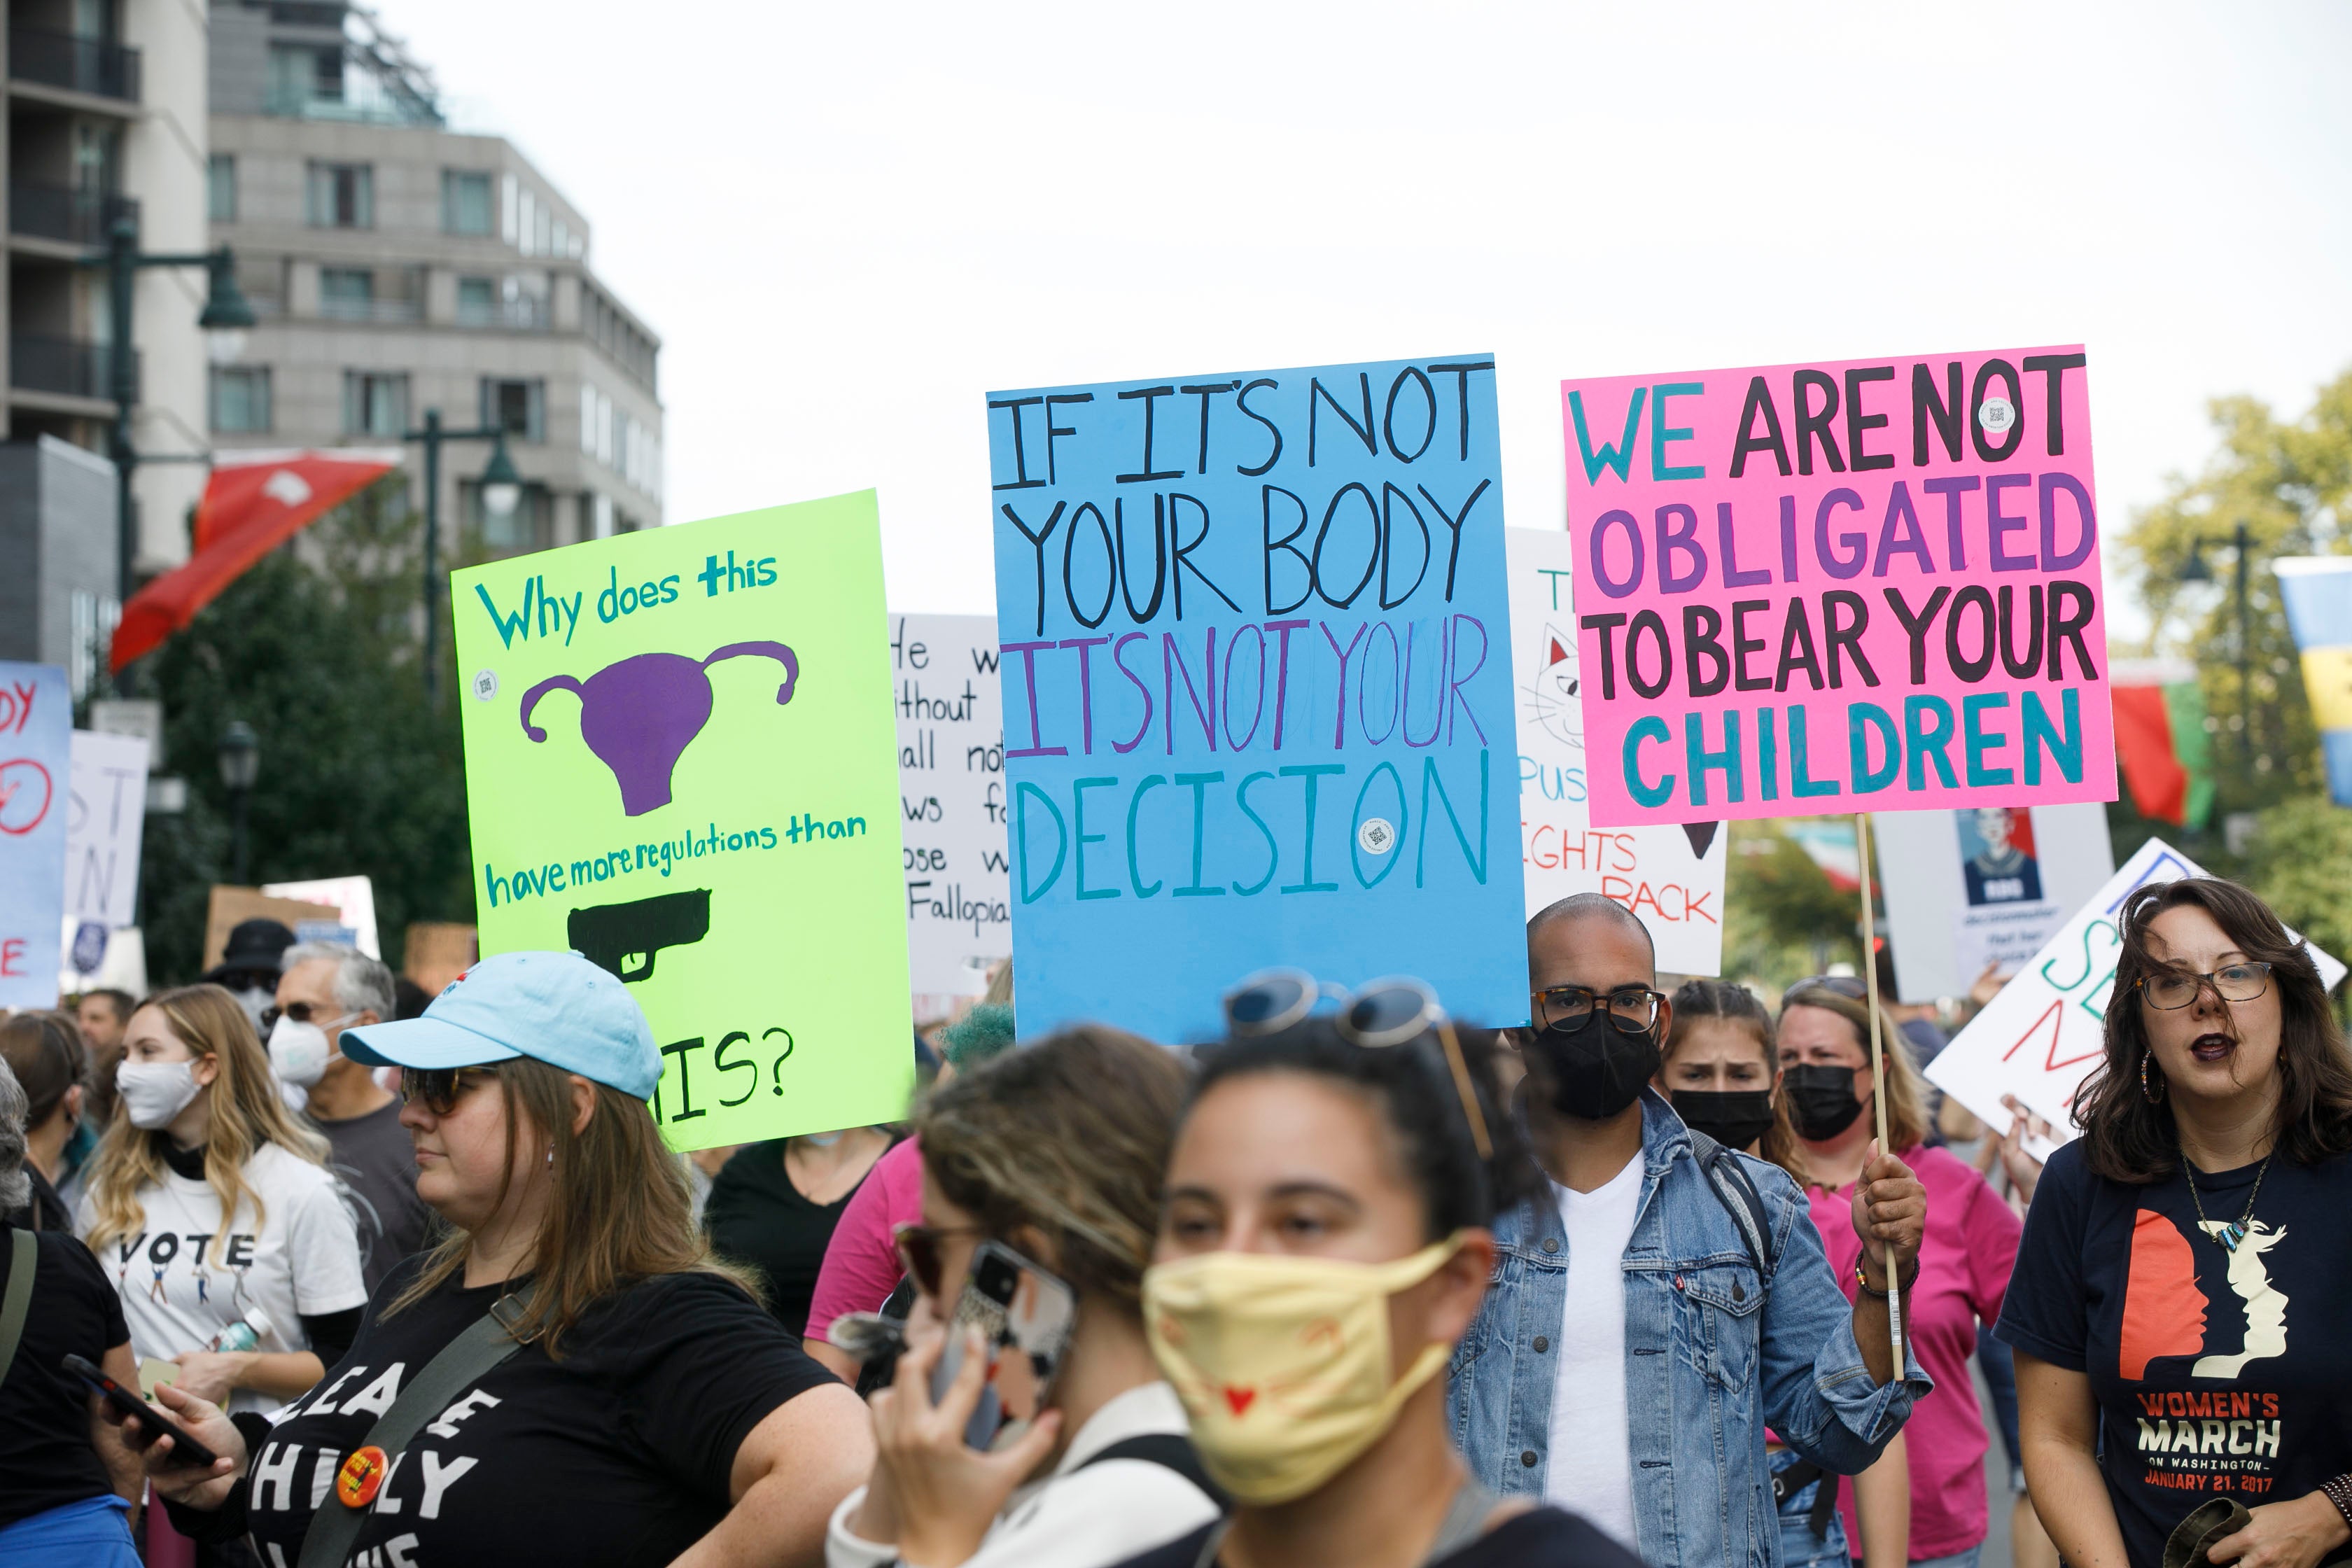 March in Philly for reproductive rights draws about 1,000 WHYY